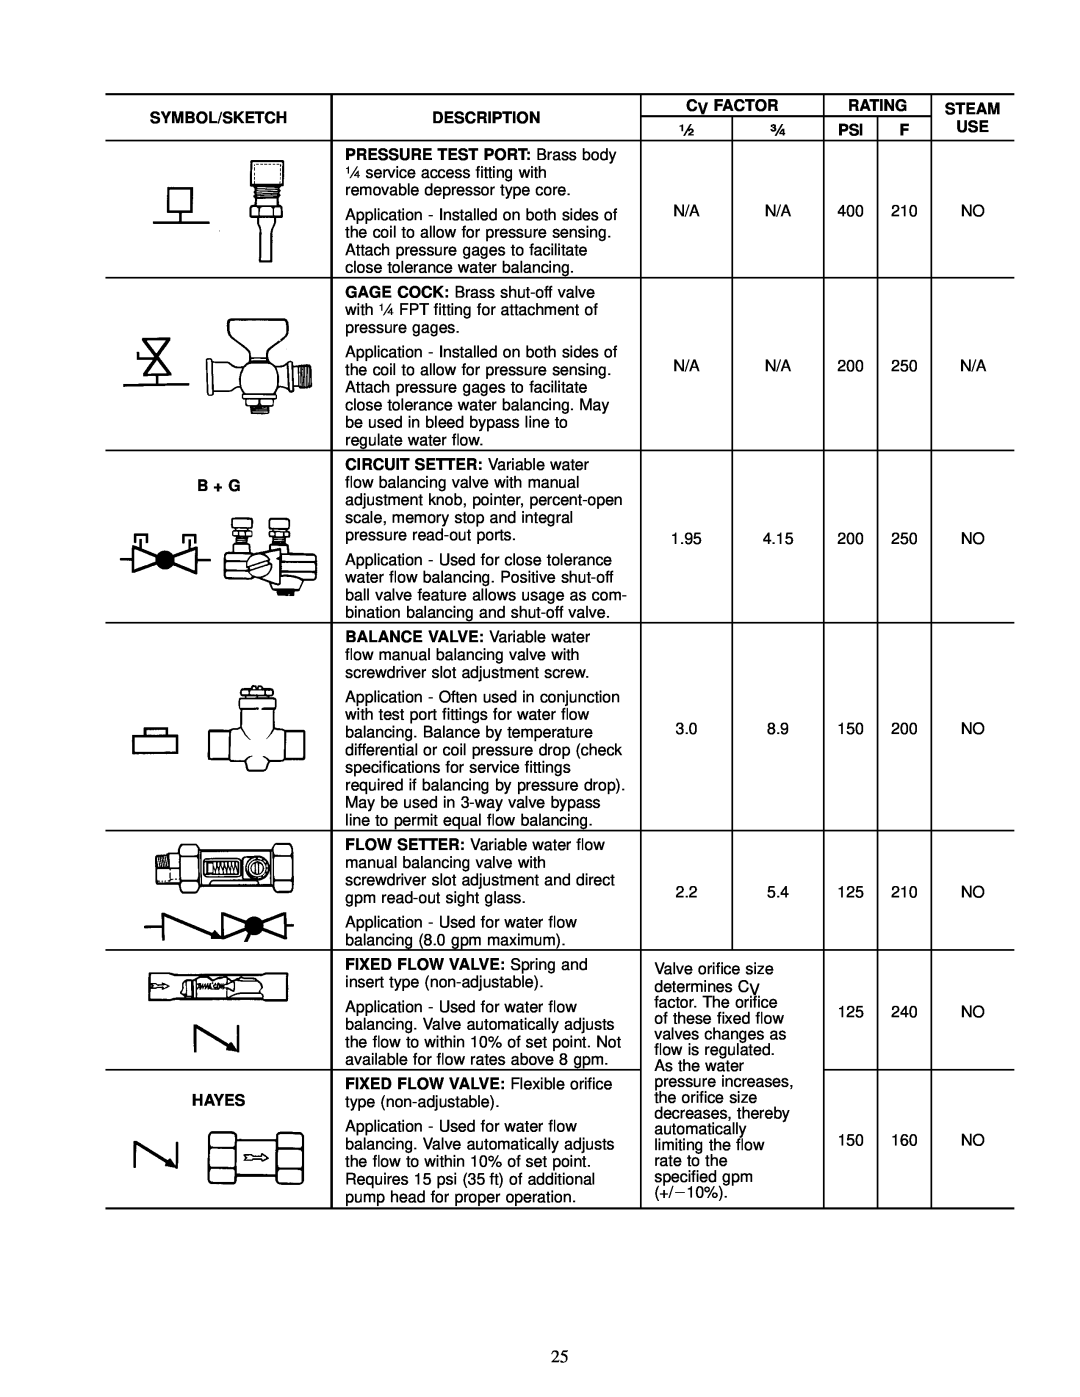 Carrier 42 SERIES specifications Symbol/Sketch 